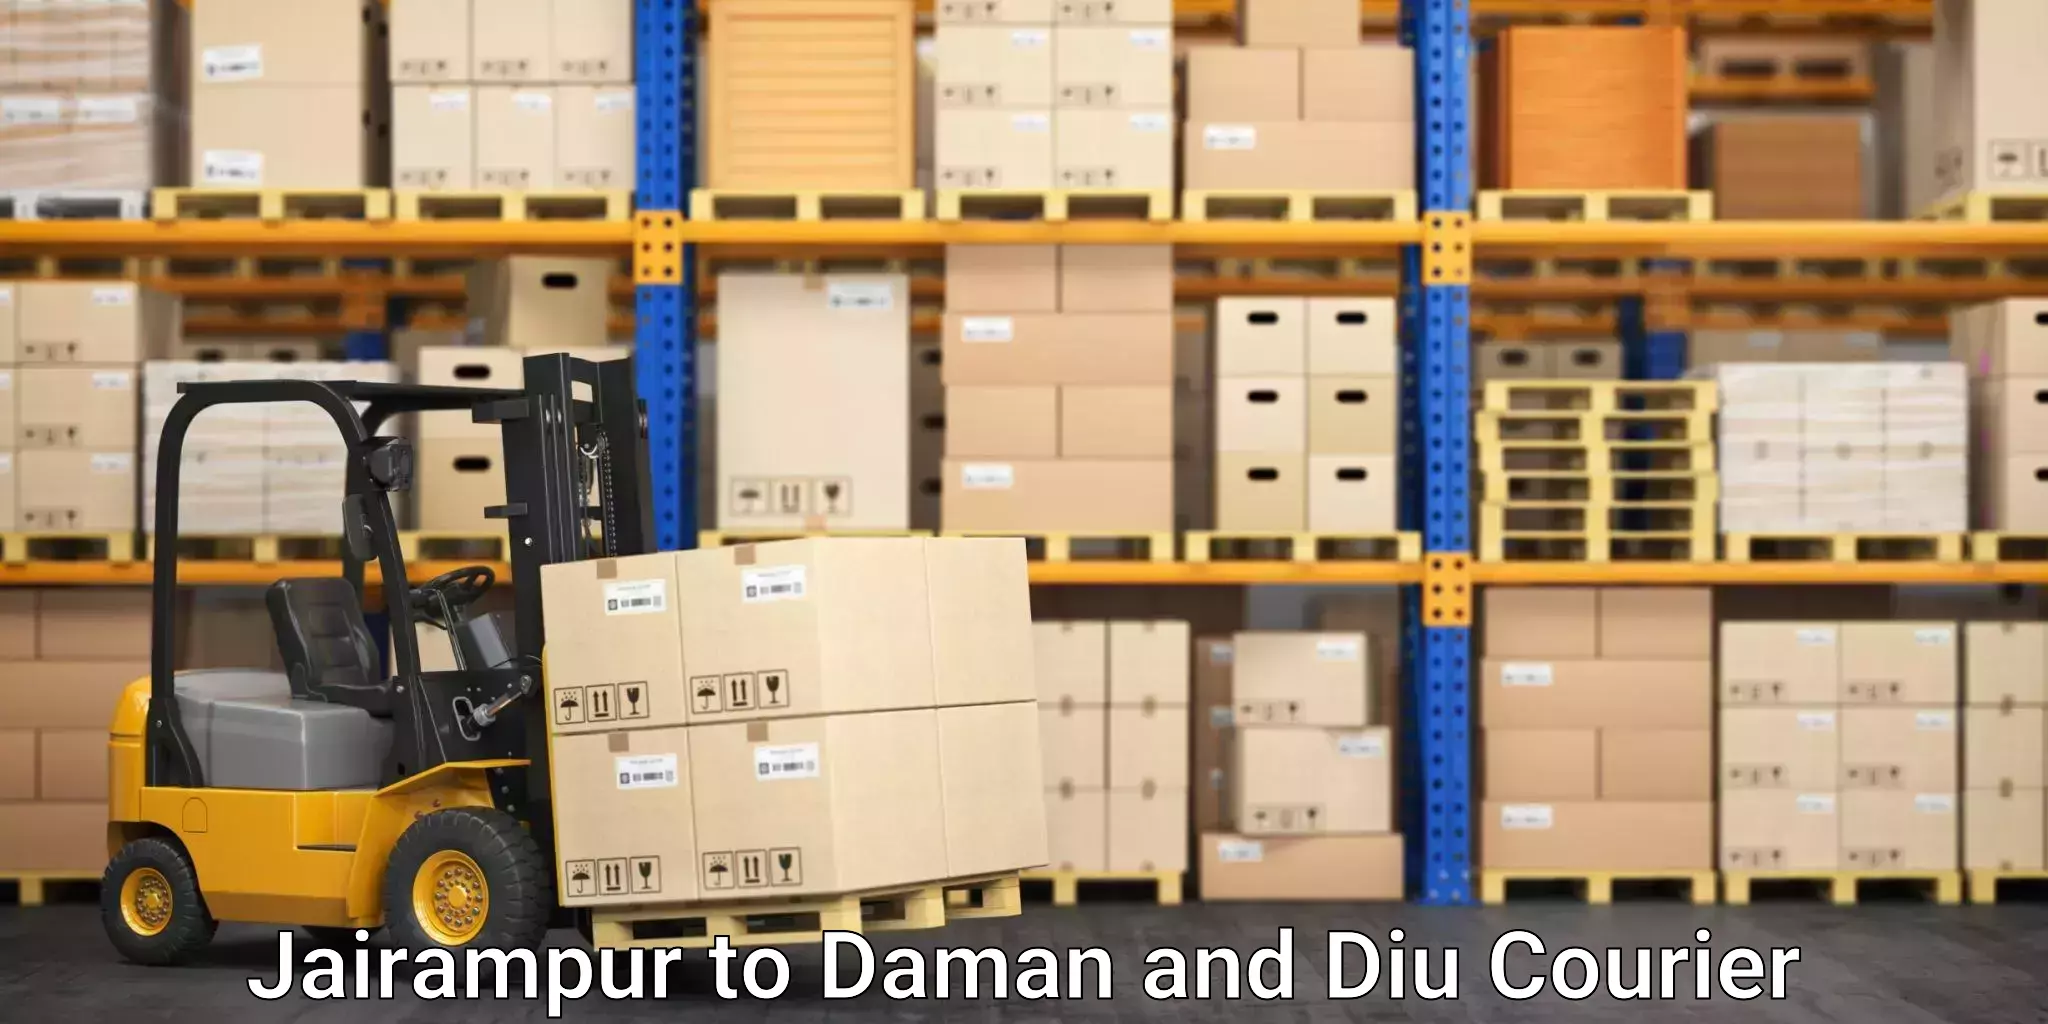 Round-the-clock parcel delivery Jairampur to Daman